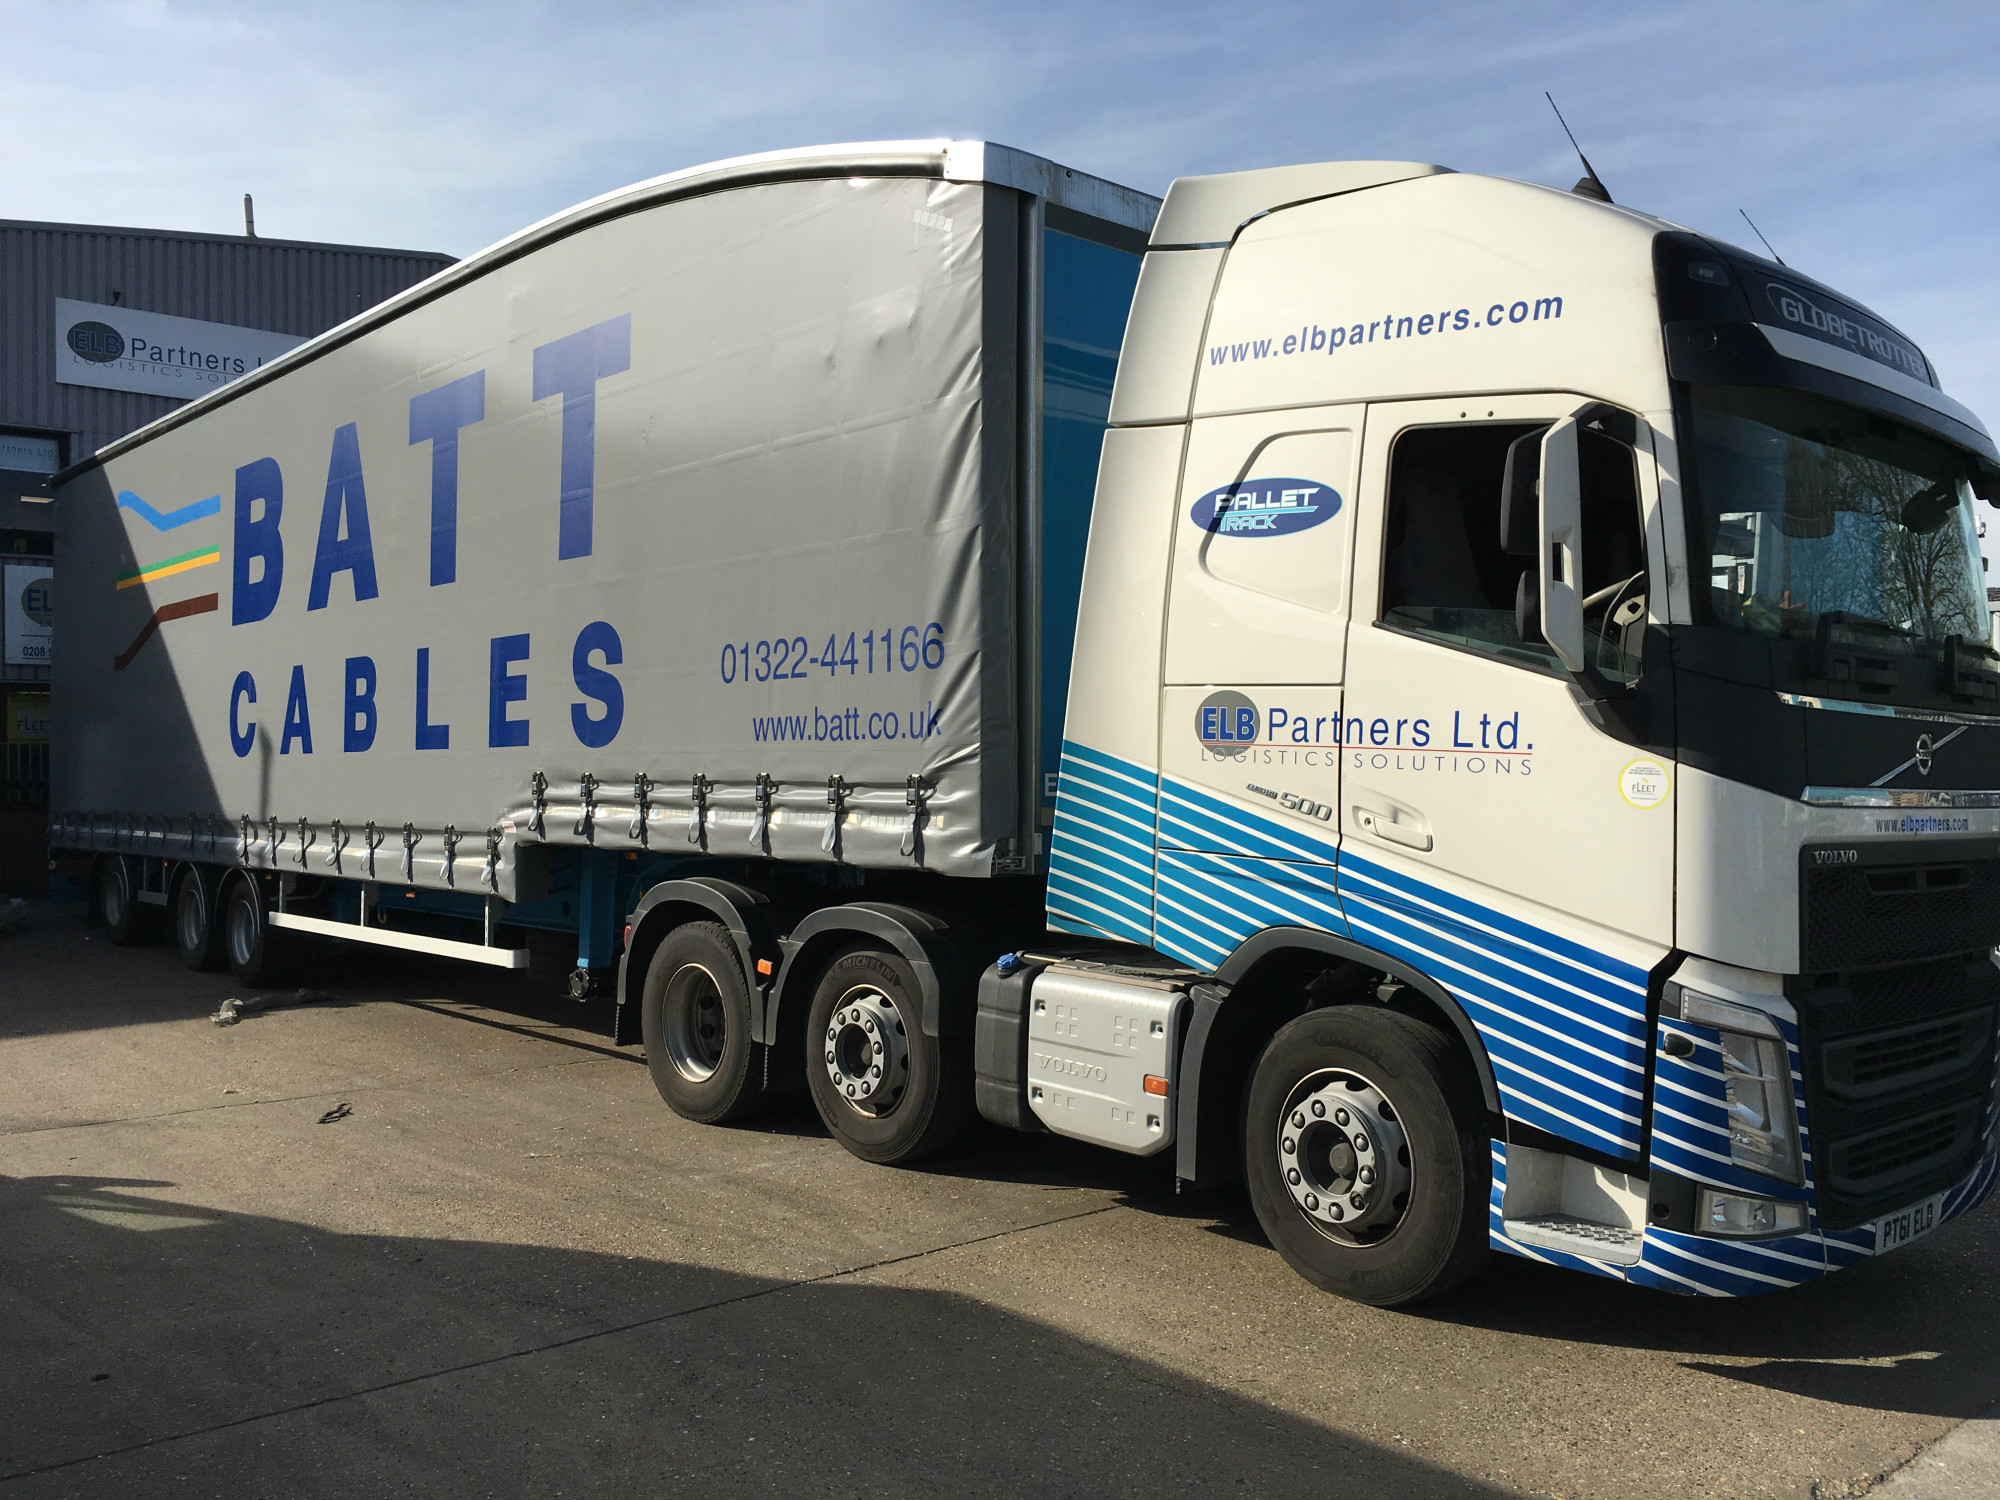 ELB Partners lorry delivering for Batt Cables